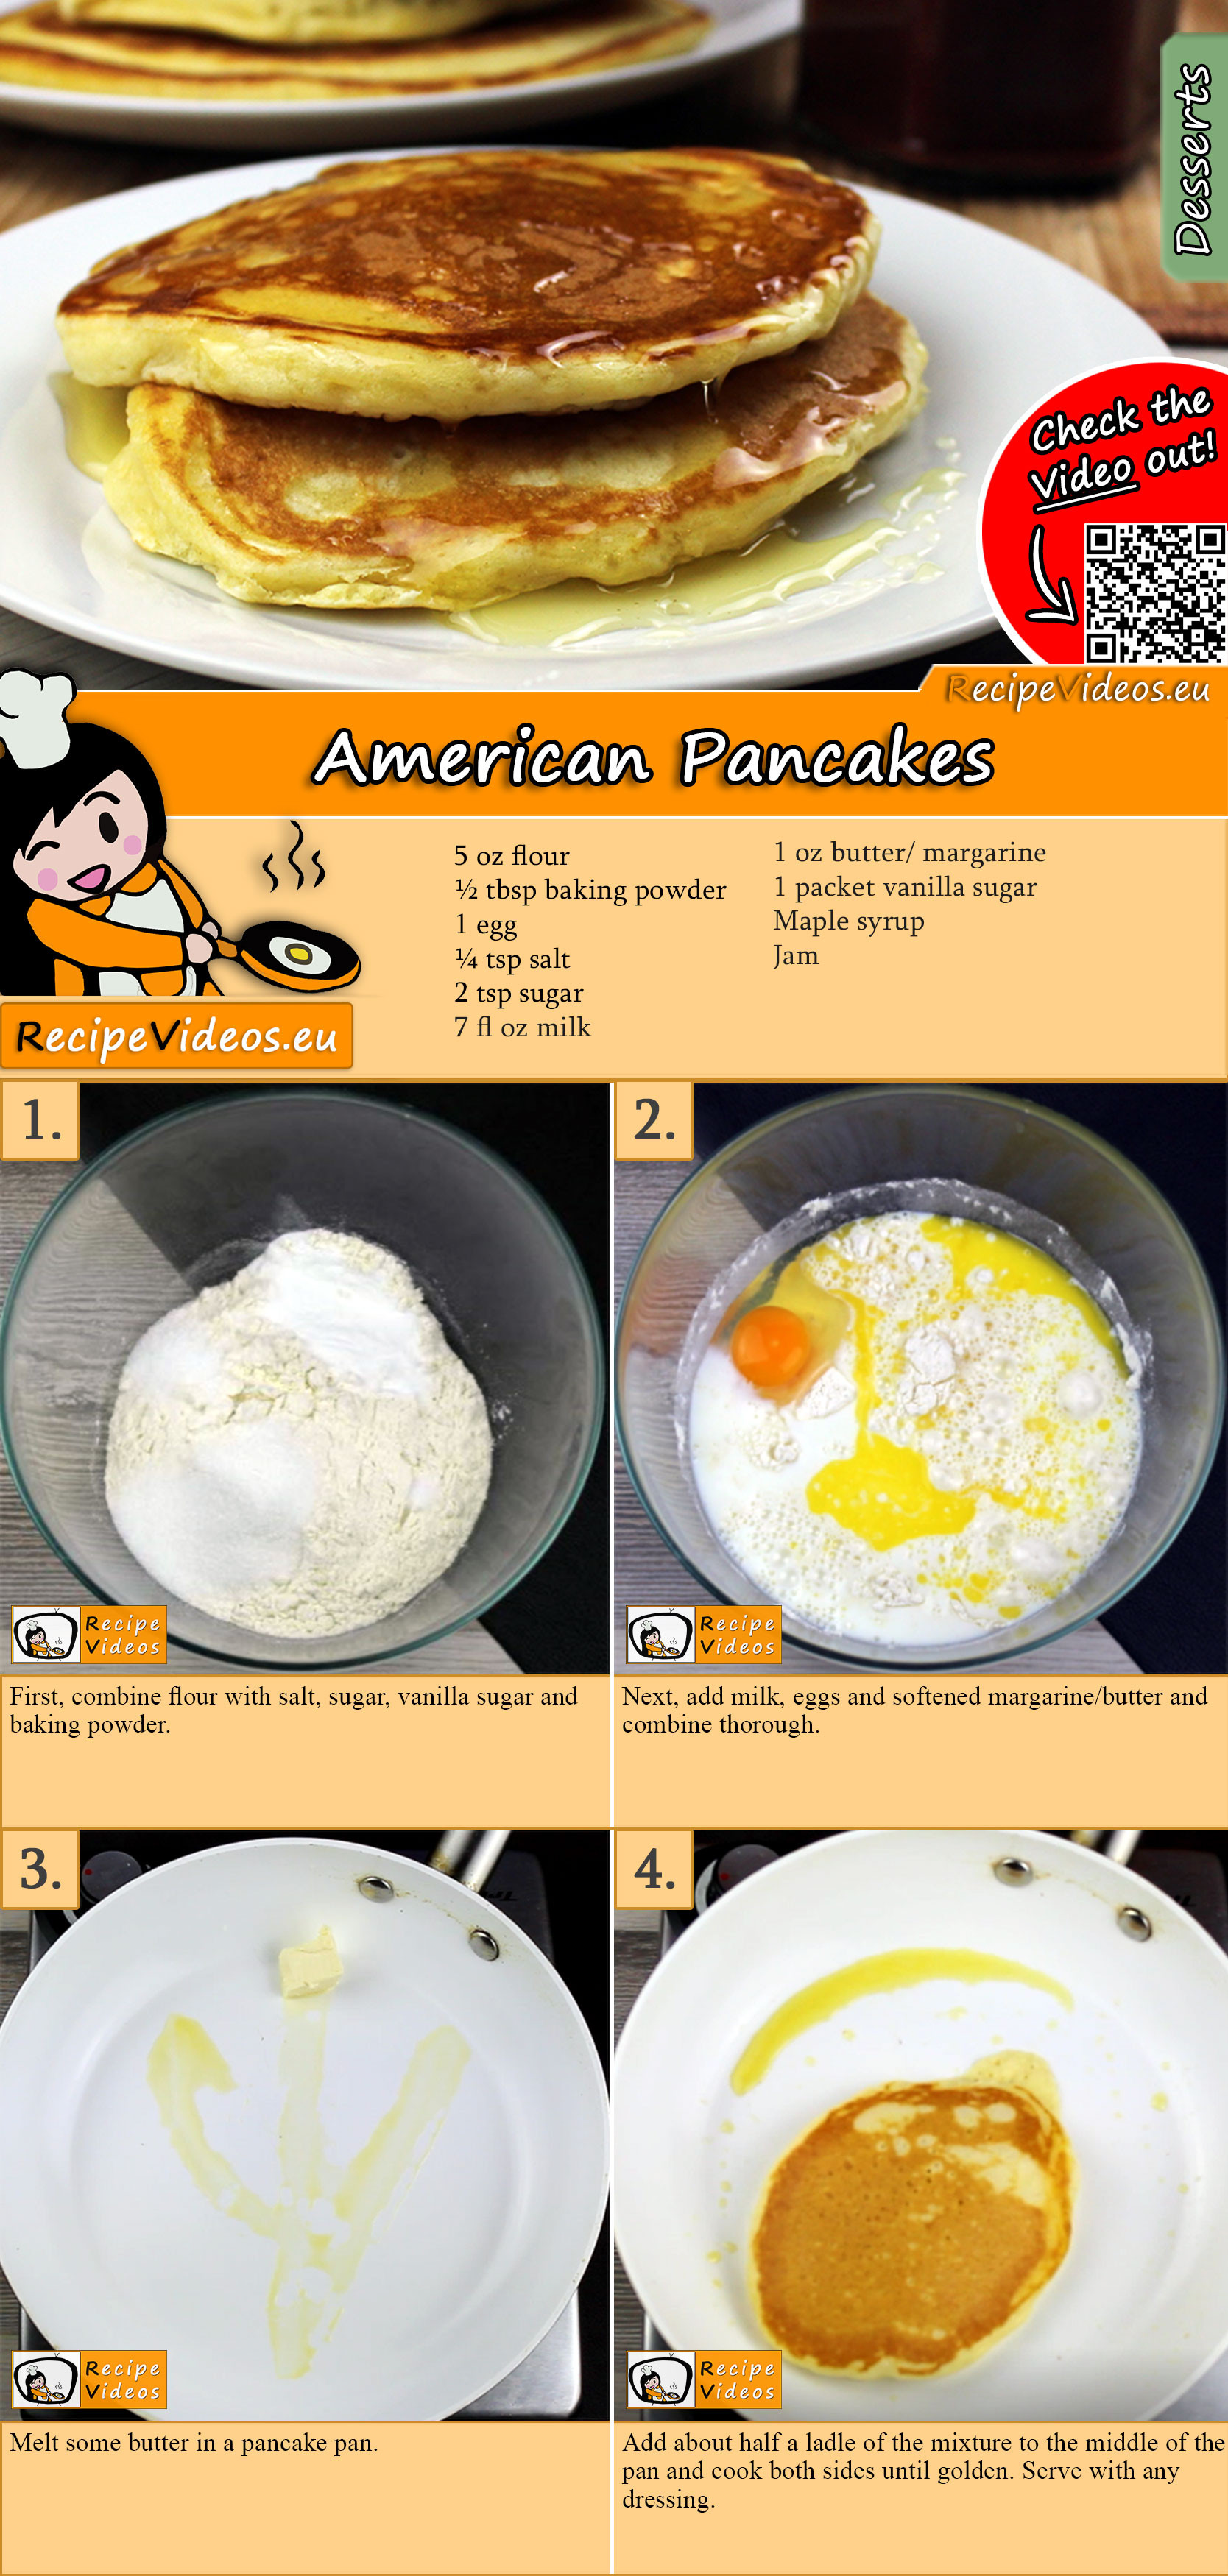 American Pancakes recipe with video